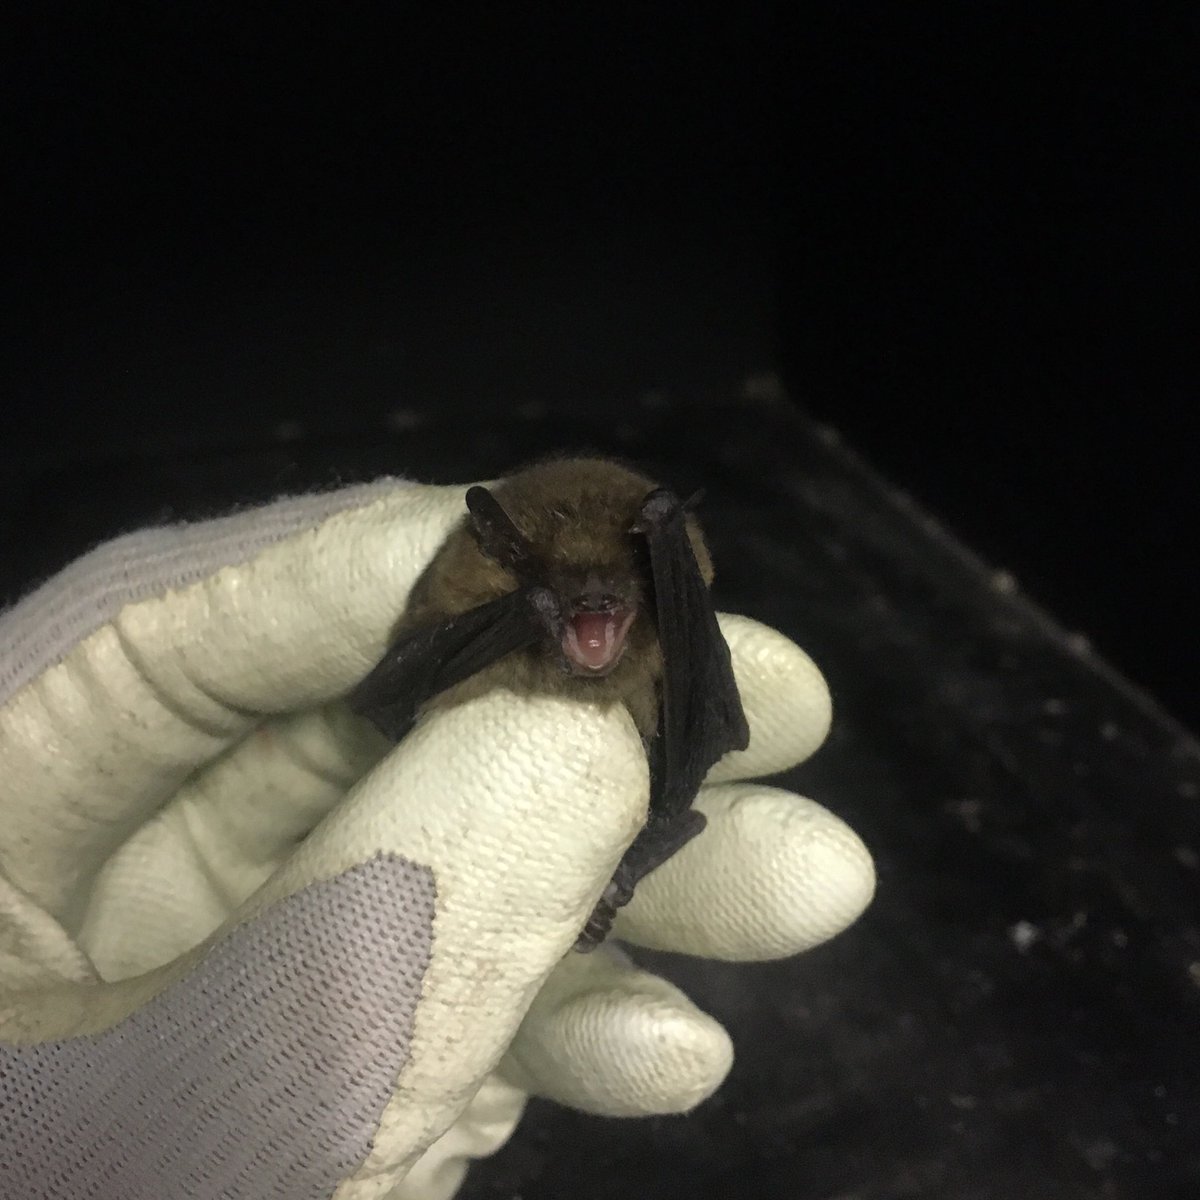 I had this female Soprano Pipistrelle in care for a few days. Click link to watch a video of its stay with me.

youtu.be/Reu9_IiWjkw

#bat #batcare #batrehab #wildliferehab #wildliferehabber #batrescue #wildliferescue #wildlife #nature
@BBCSpringwatch @_BCT_ @Mammal_Society